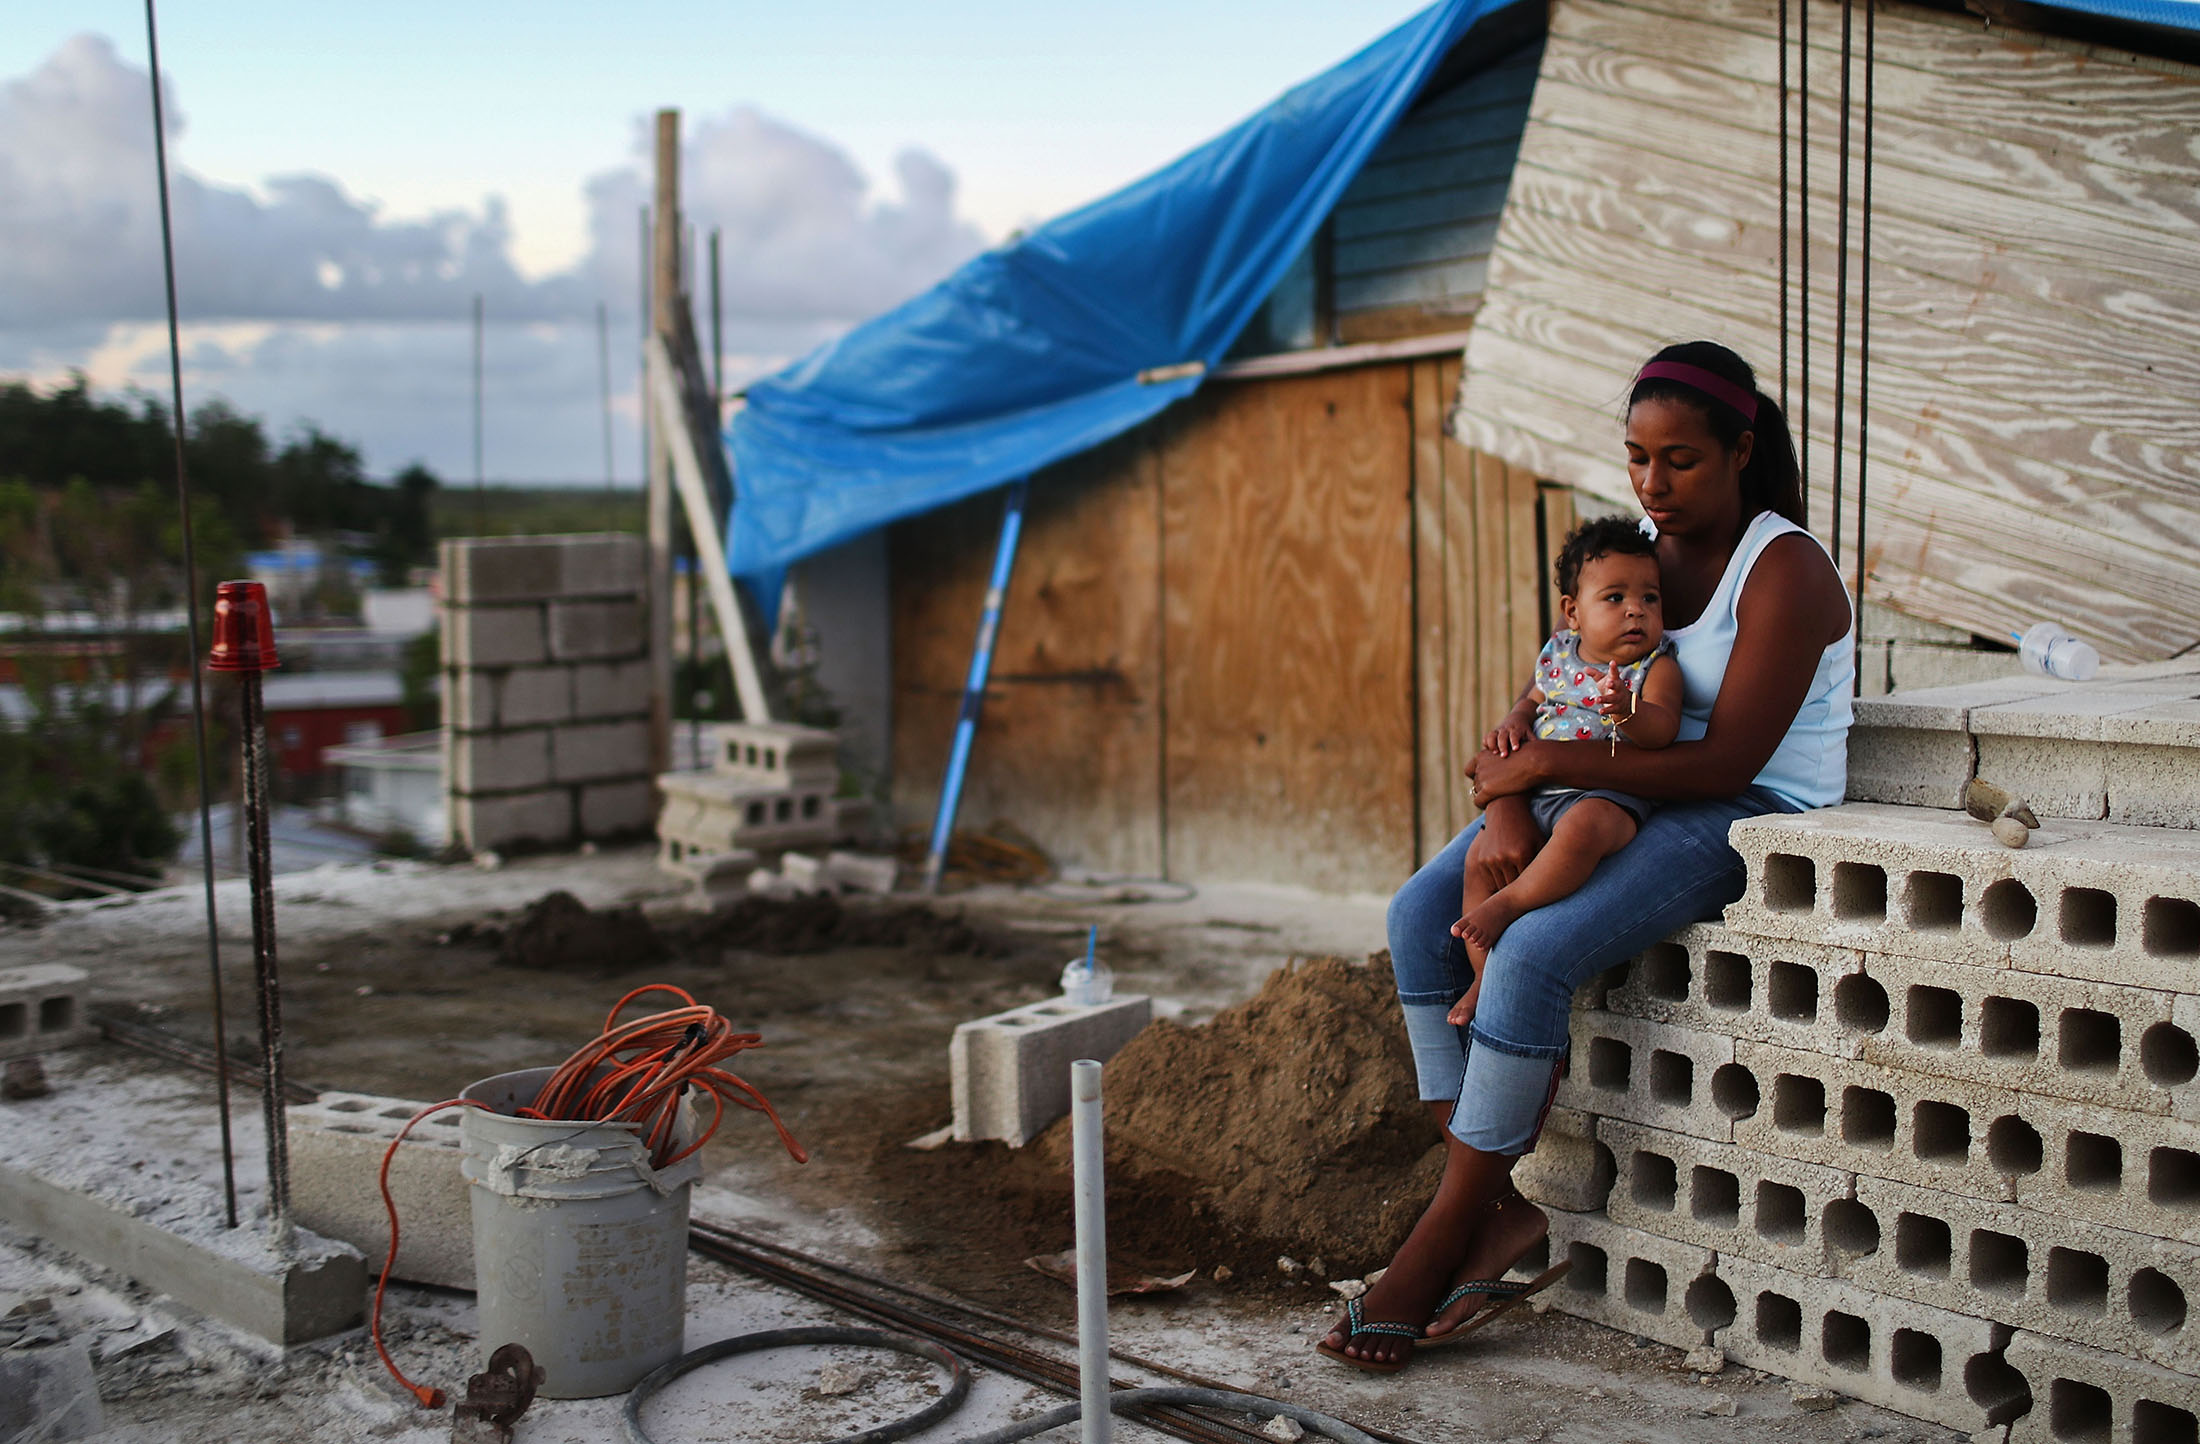 A mother&nbsp;holds her baby&nbsp;at their makeshift home, under reconstruction, after being mostly destroyed by Hurricane Maria,&nbsp;in San Isidro, on Dec. 23, 2017.&nbsp;